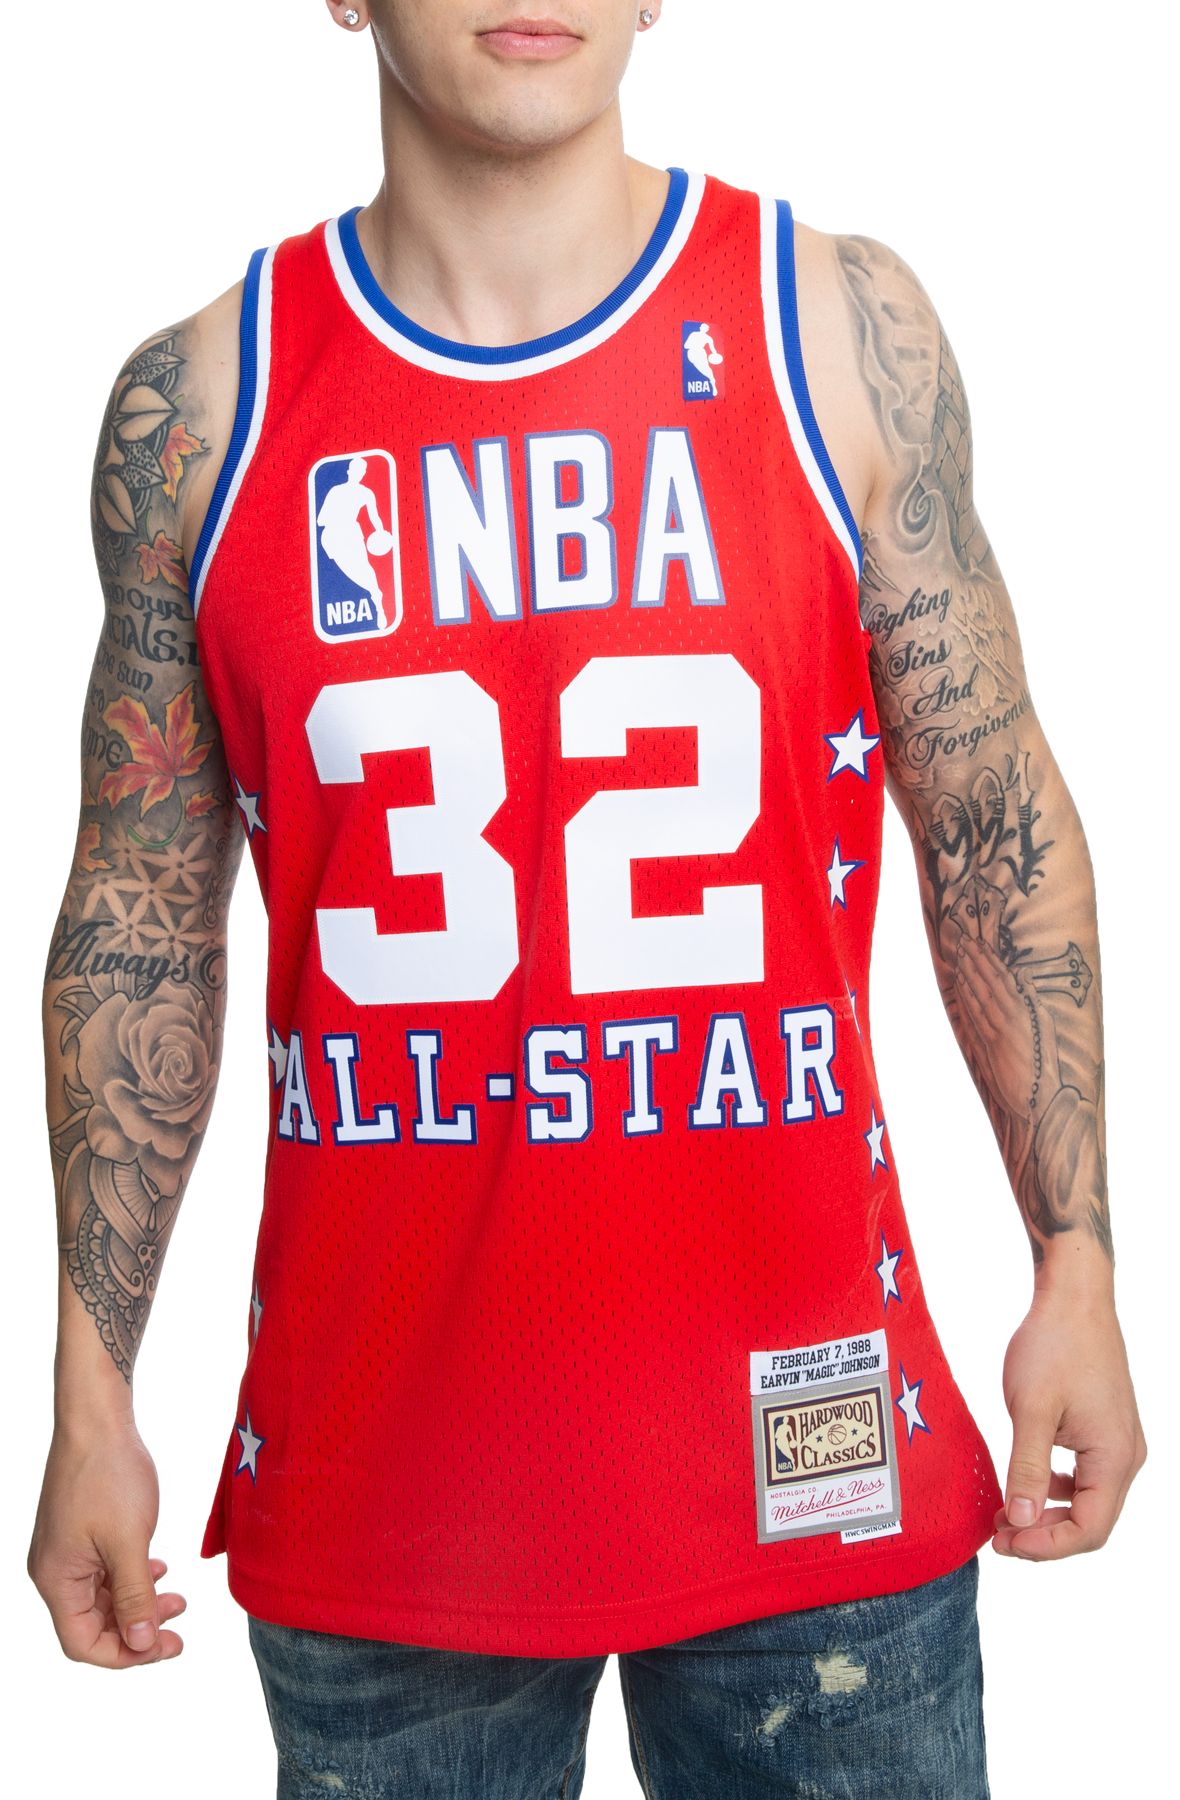 Mitchell & Ness All Over West Mens Swingman Jersey (White)